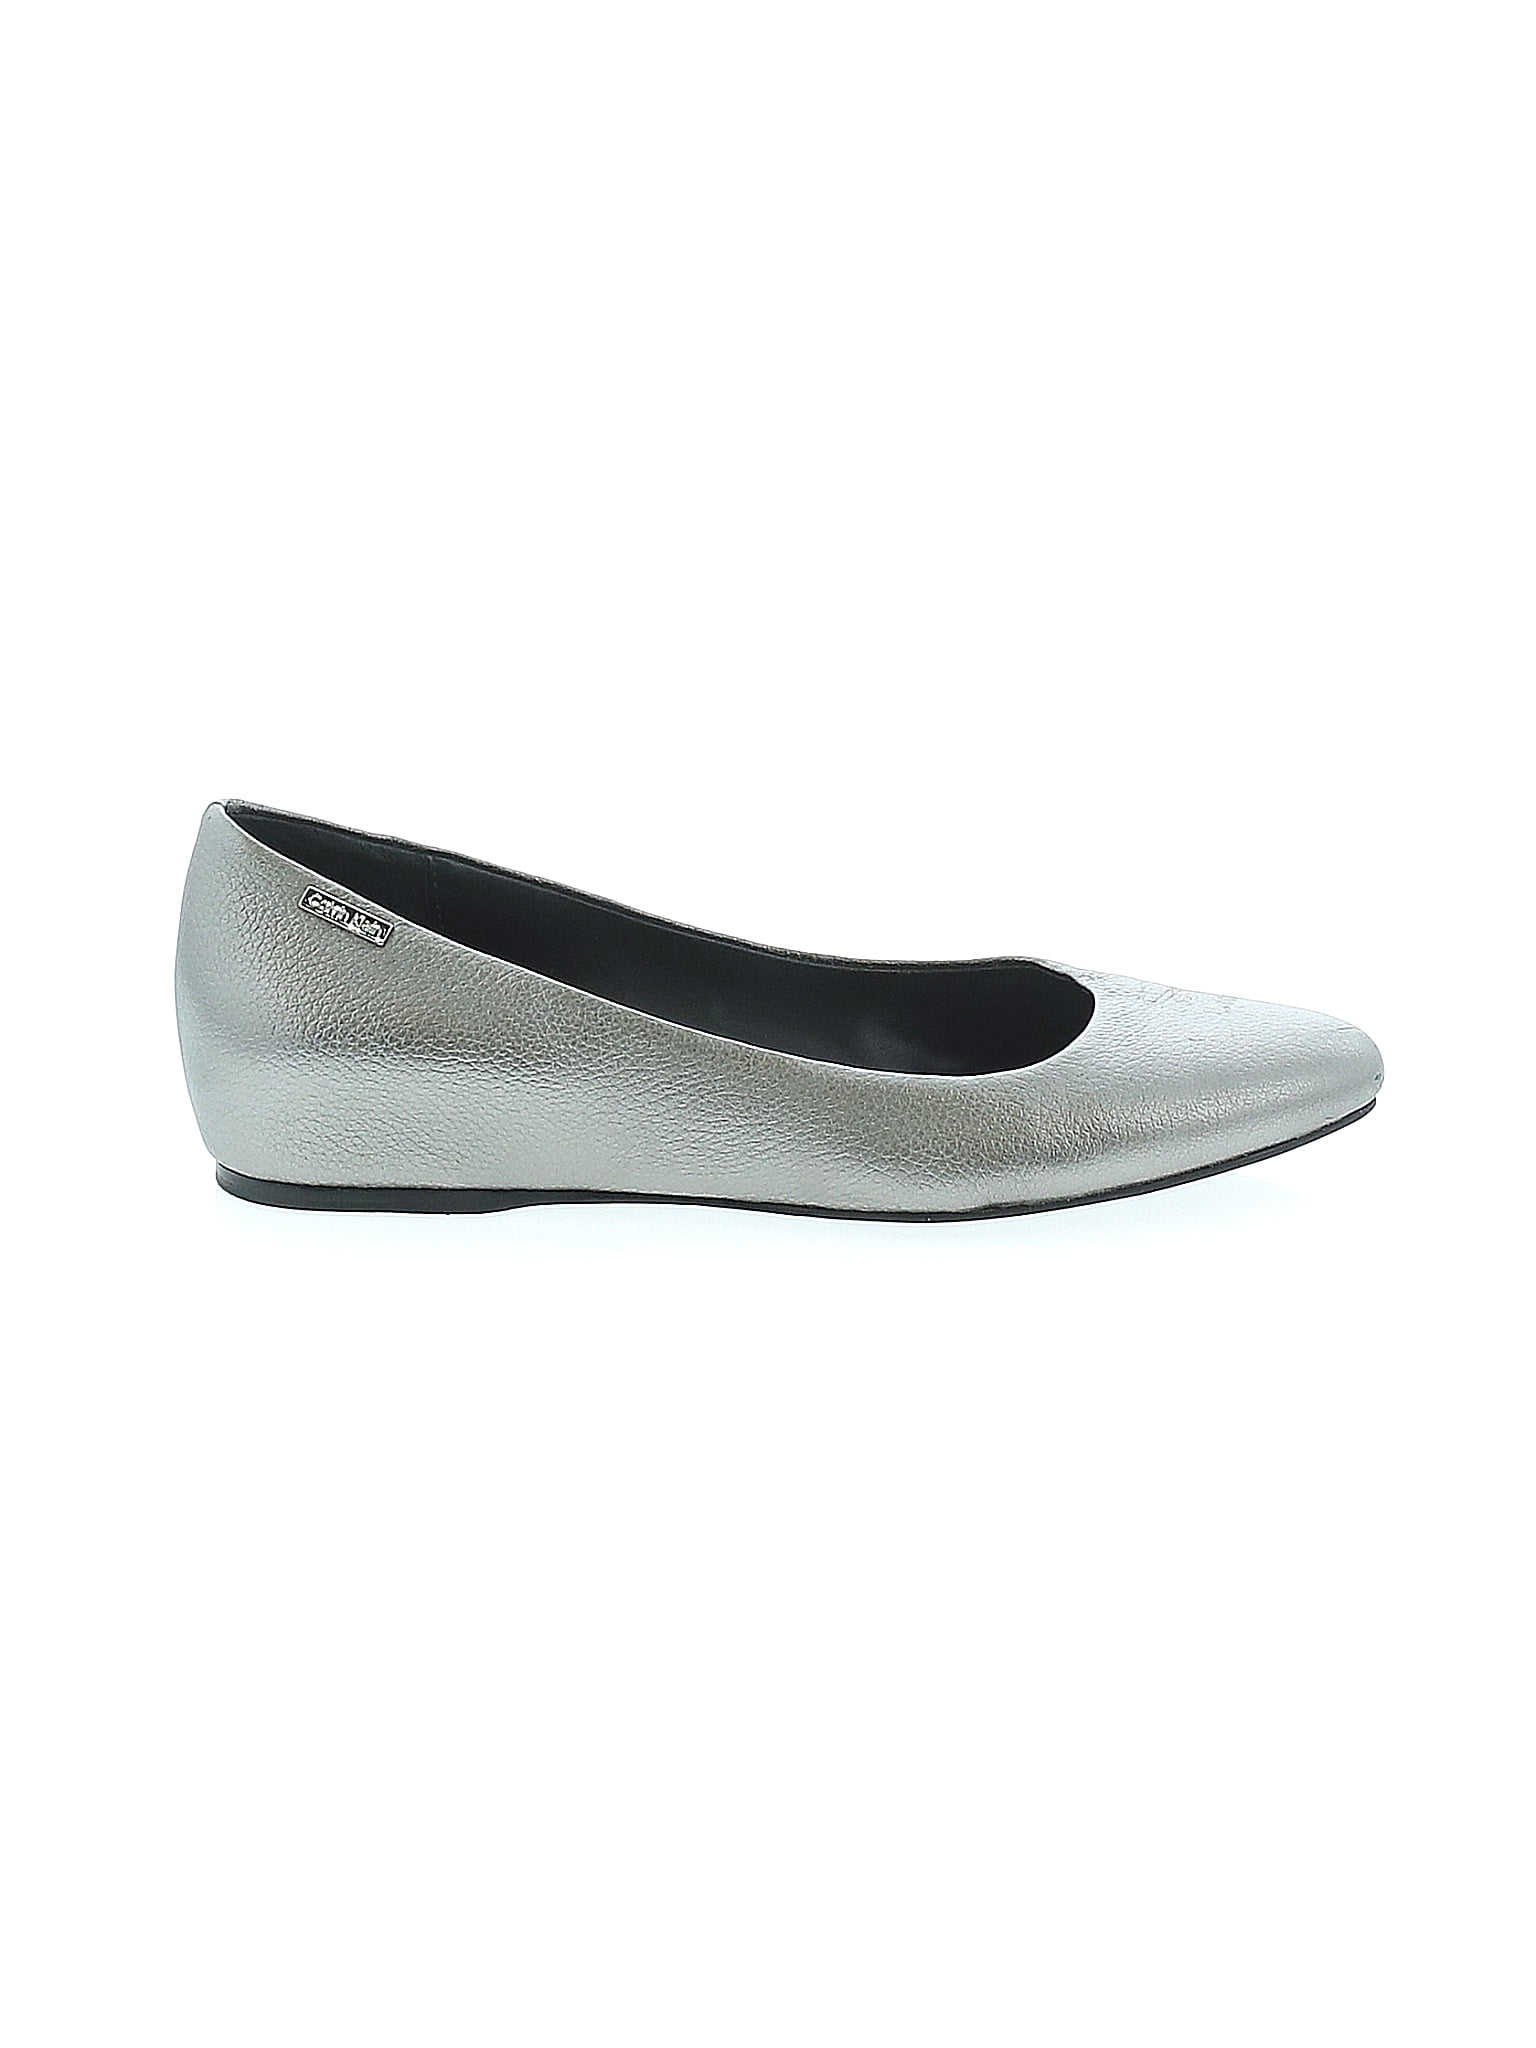 Pre-Owned Calvin Klein Women's Size 7 Flats 